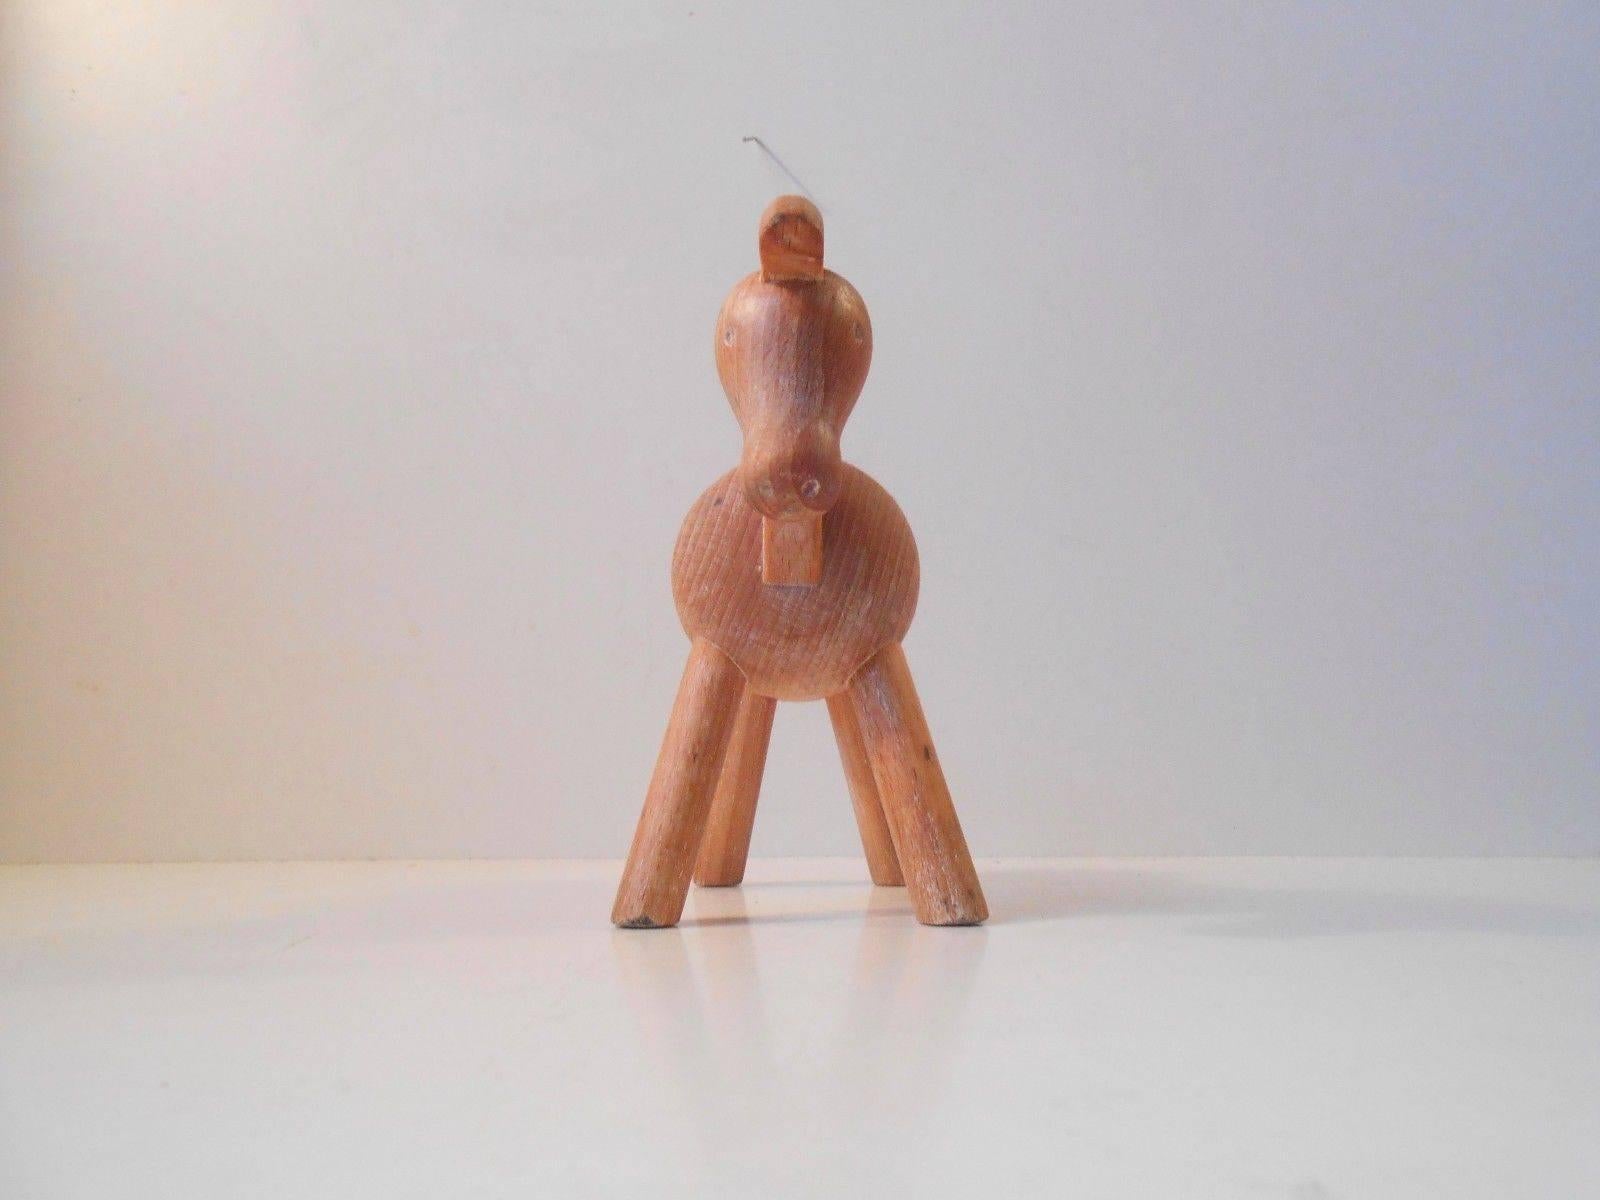 Measurement and info:

Type: Wooden horse toy/figure.

Material: Beech.

Color: Beech with natural patina and aging.

Design/maker: Kay Bojesen.

Origin: Denmark.

Period: 1950s (1935).

Height: Approximately 14 cm (5.6